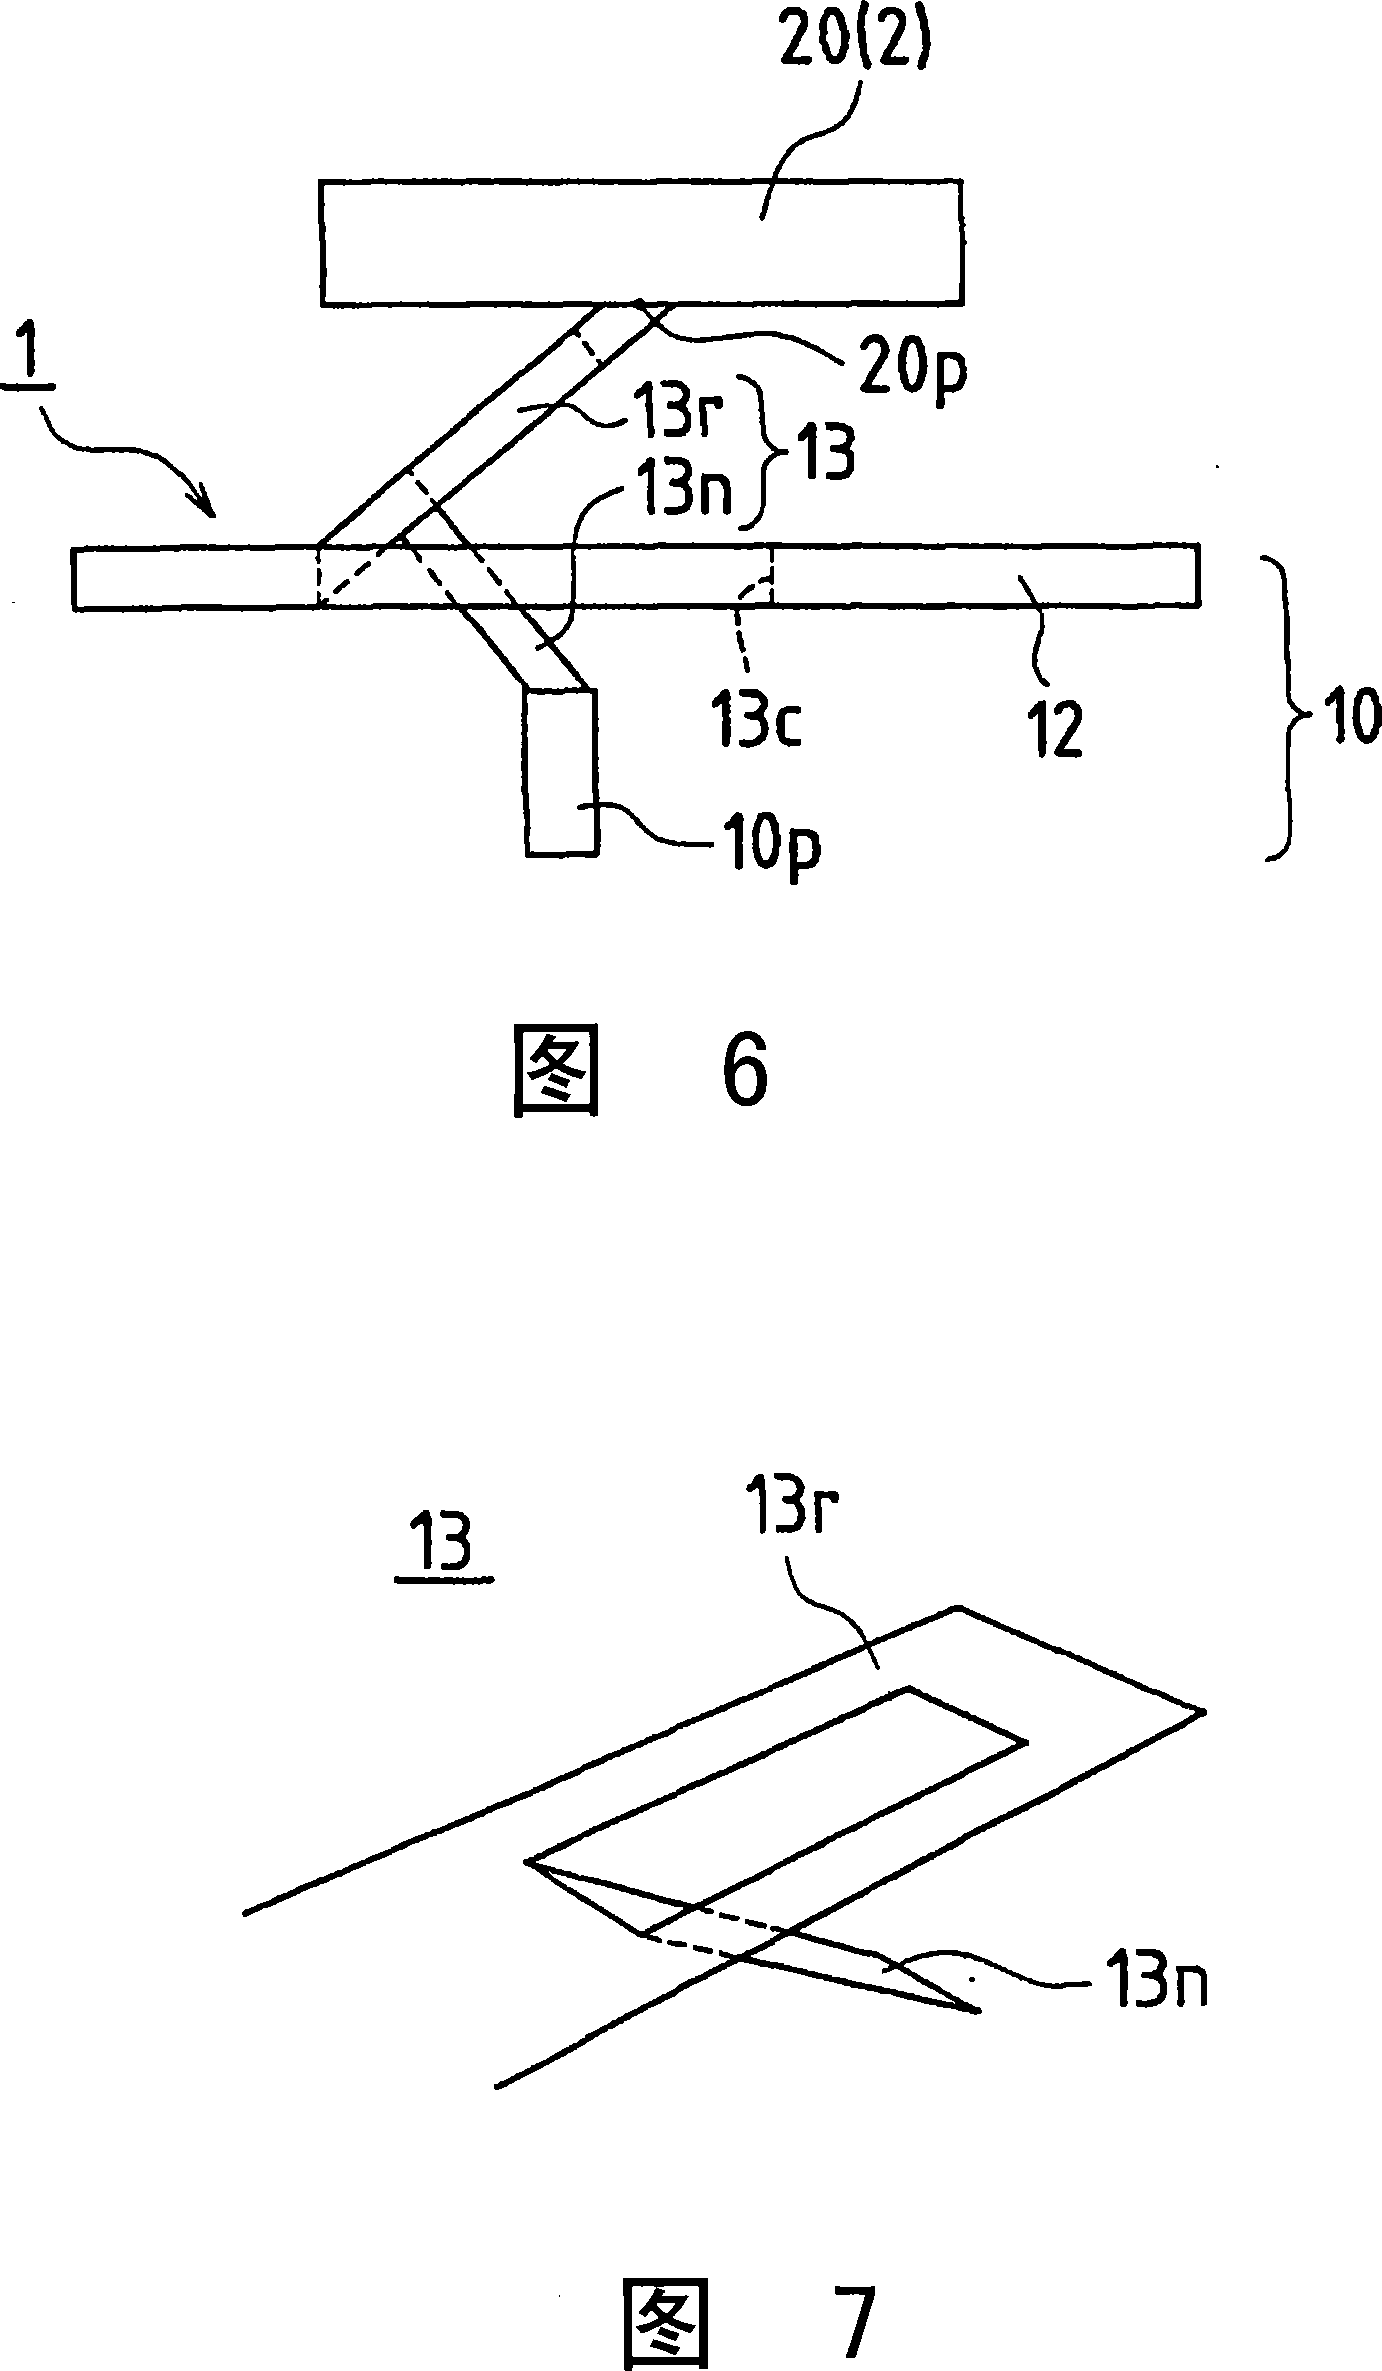 Electronic tuner and electronic device